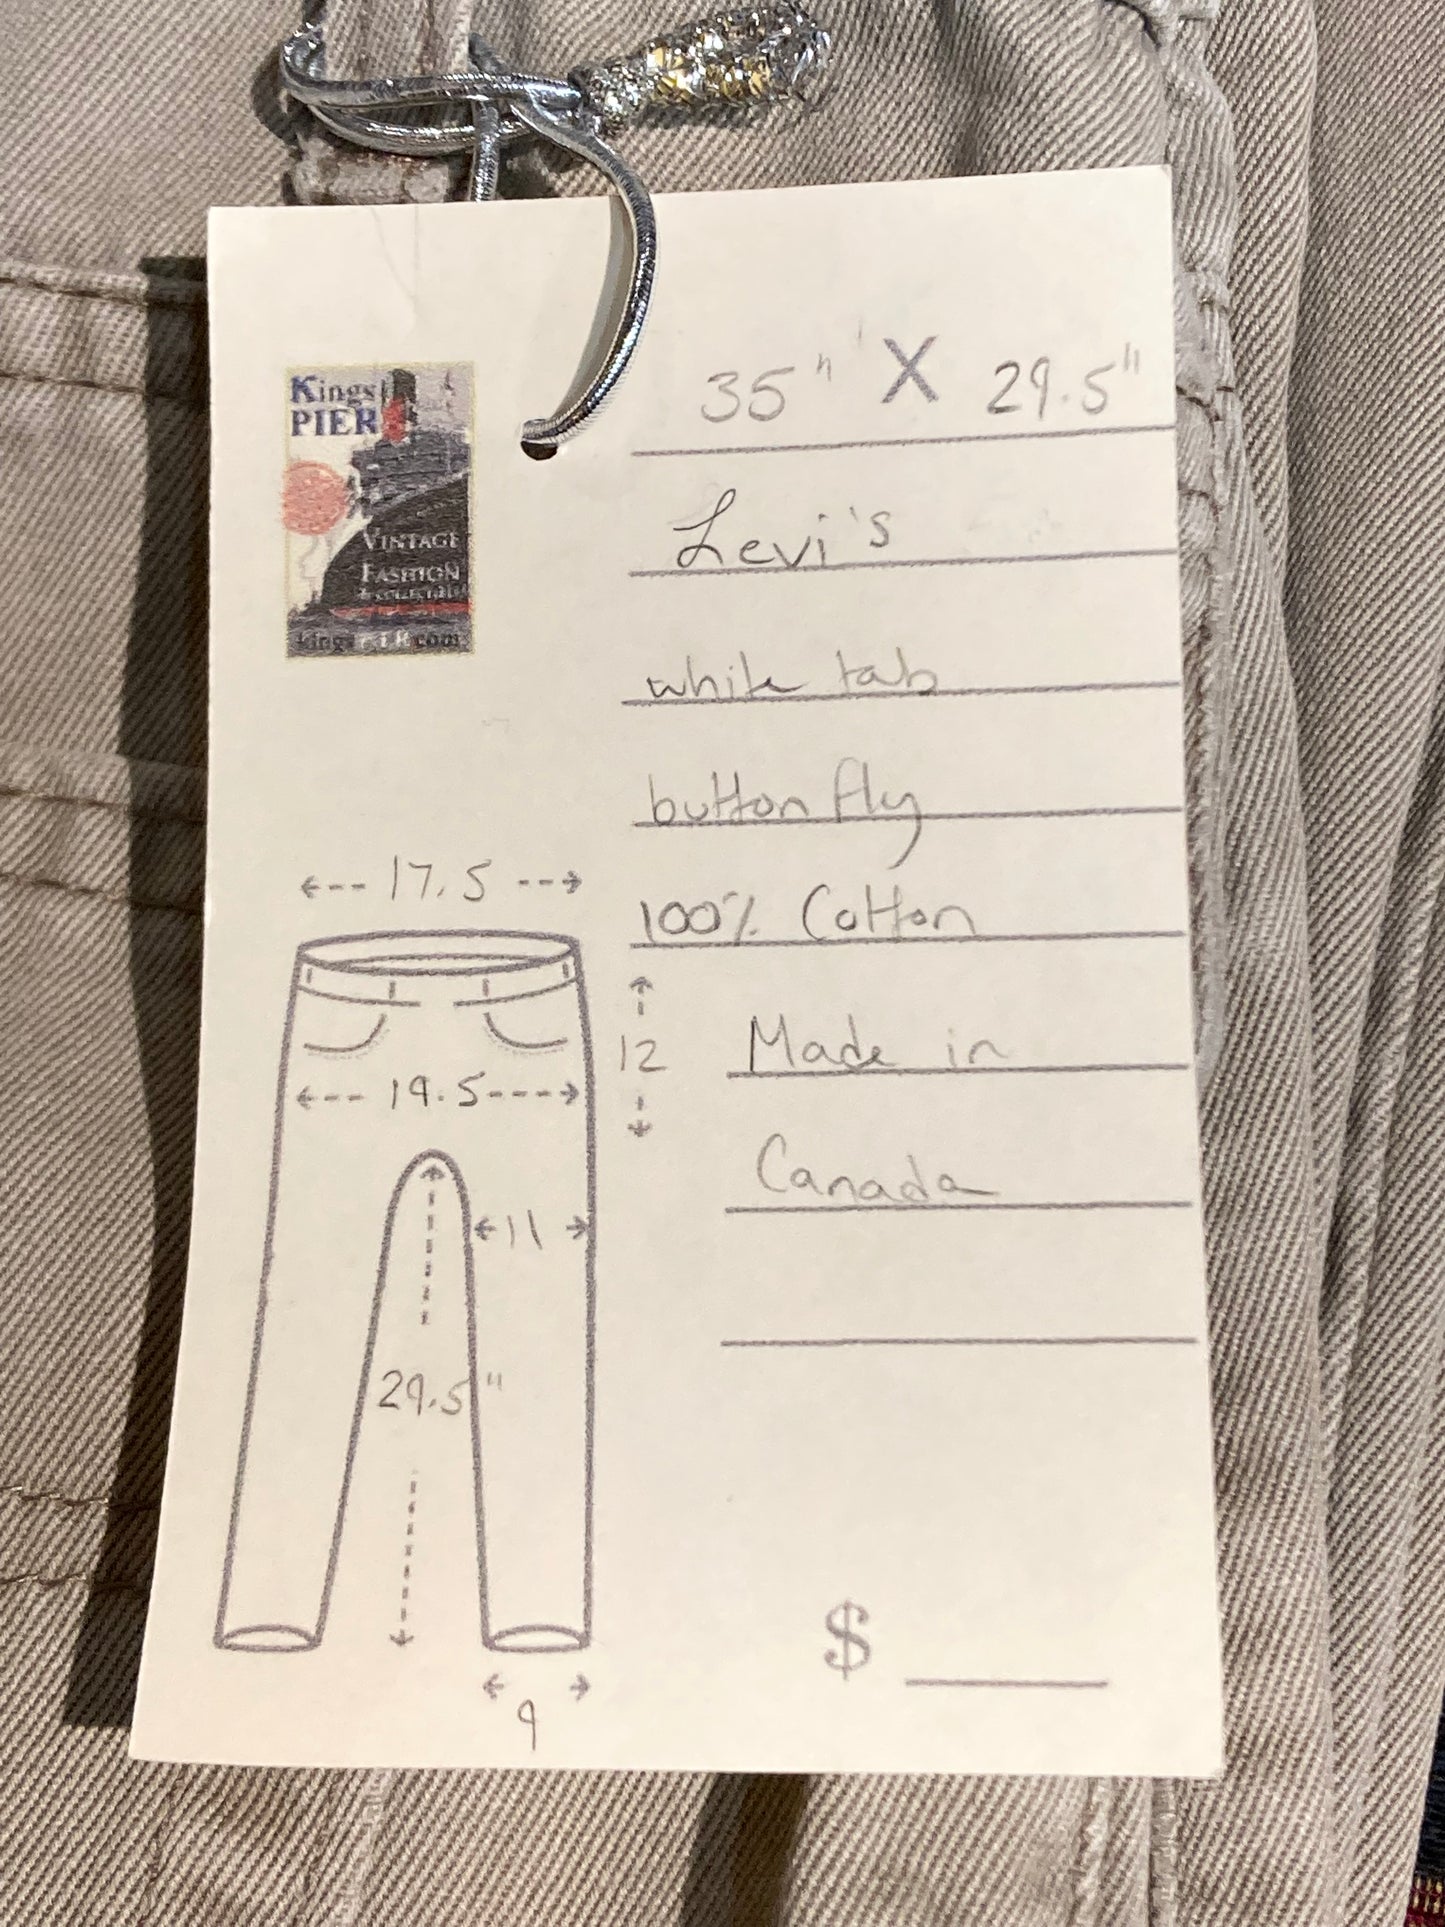 Kingspier Vintage - Levi’s 501 Vintage White Tab Grey Denim Jeans - 35”x29.5”

High rise

Button fly

Straight leg

100% cotton

Labeled 36”x32”

Made in Canada